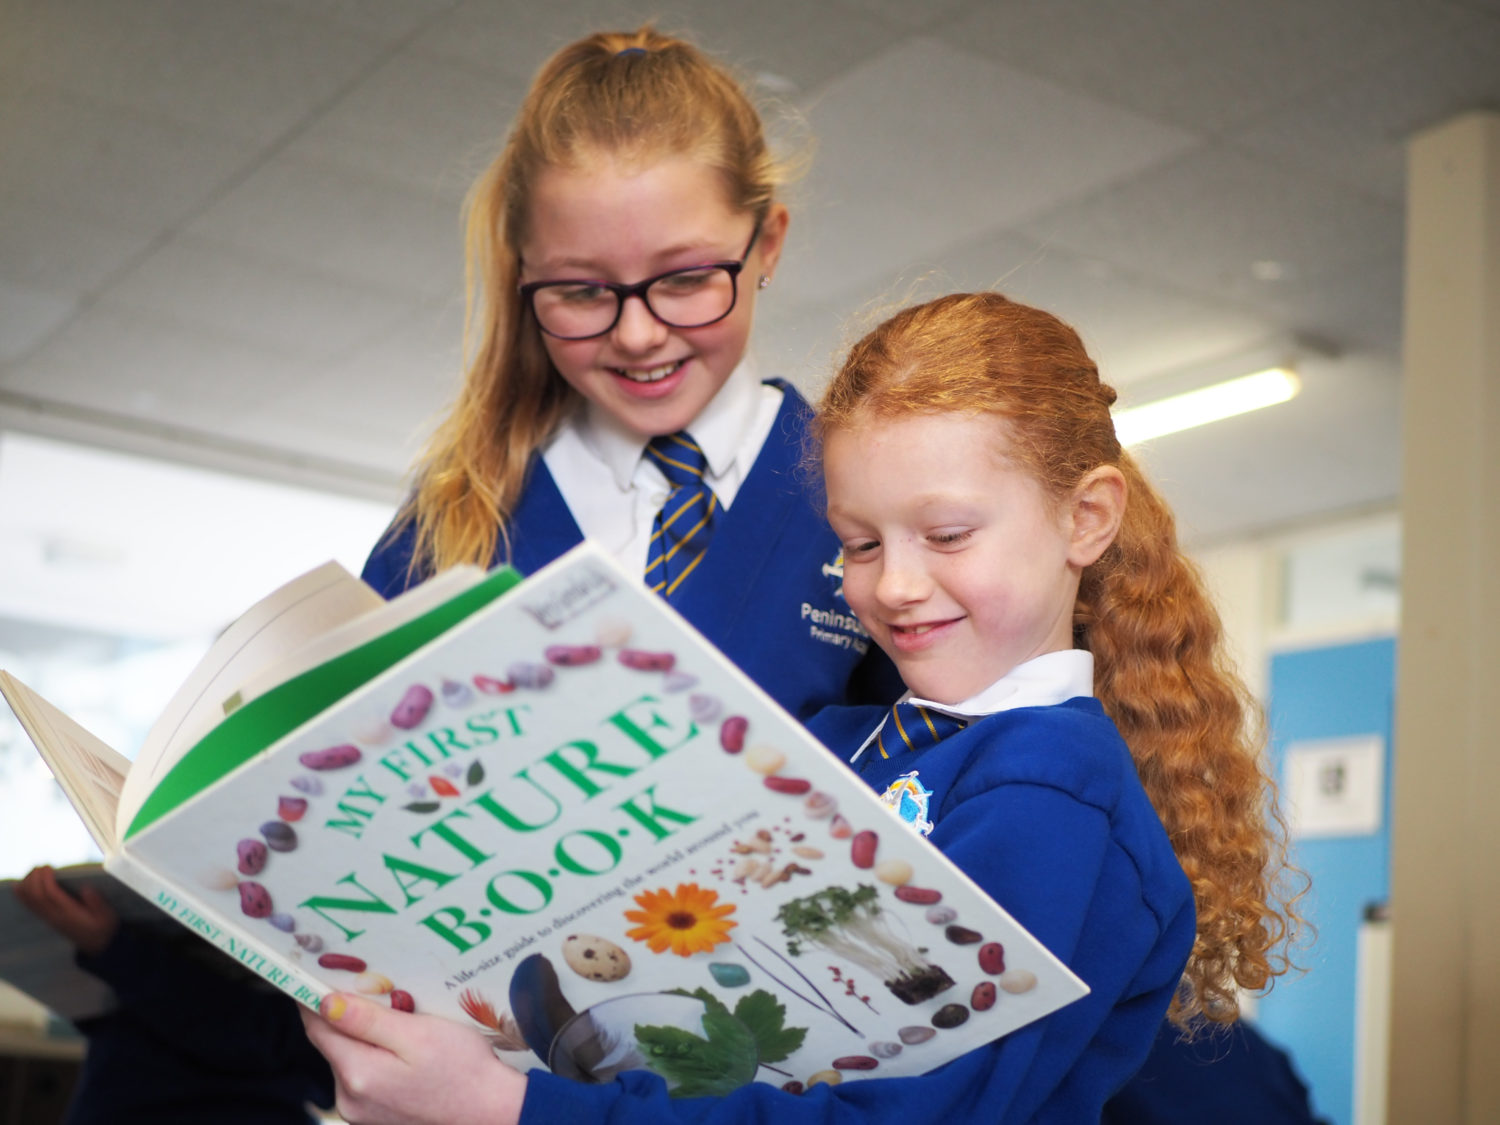 Two young girls are pictured smiling together whilst reading a large picture storybook.